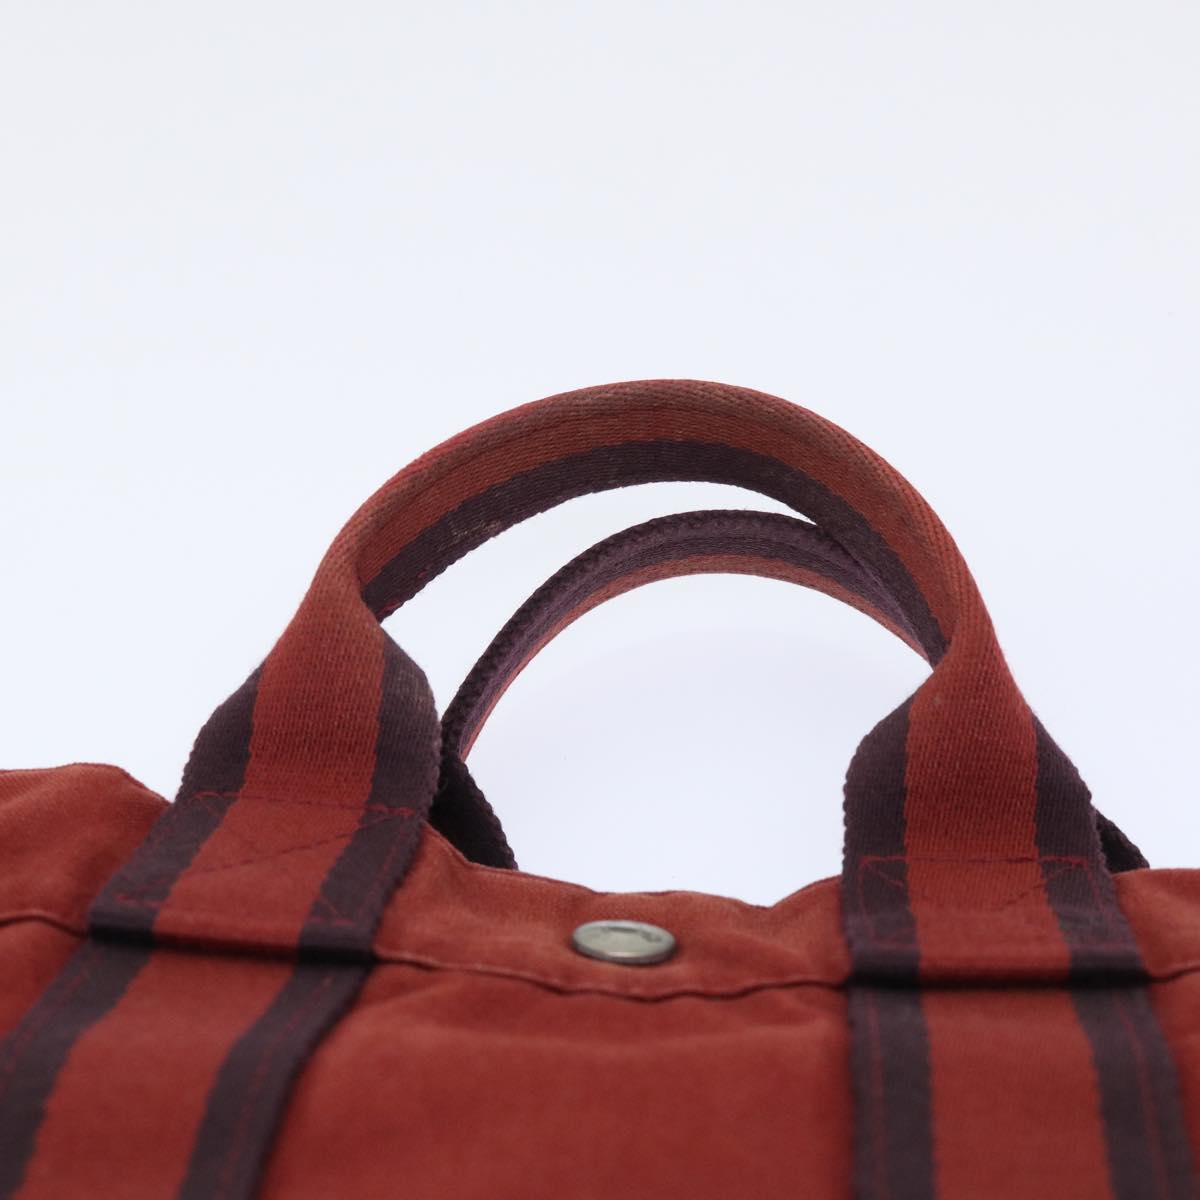 HERMES Fourre Tout PM Hand Bag Canvas Red Auth 52769